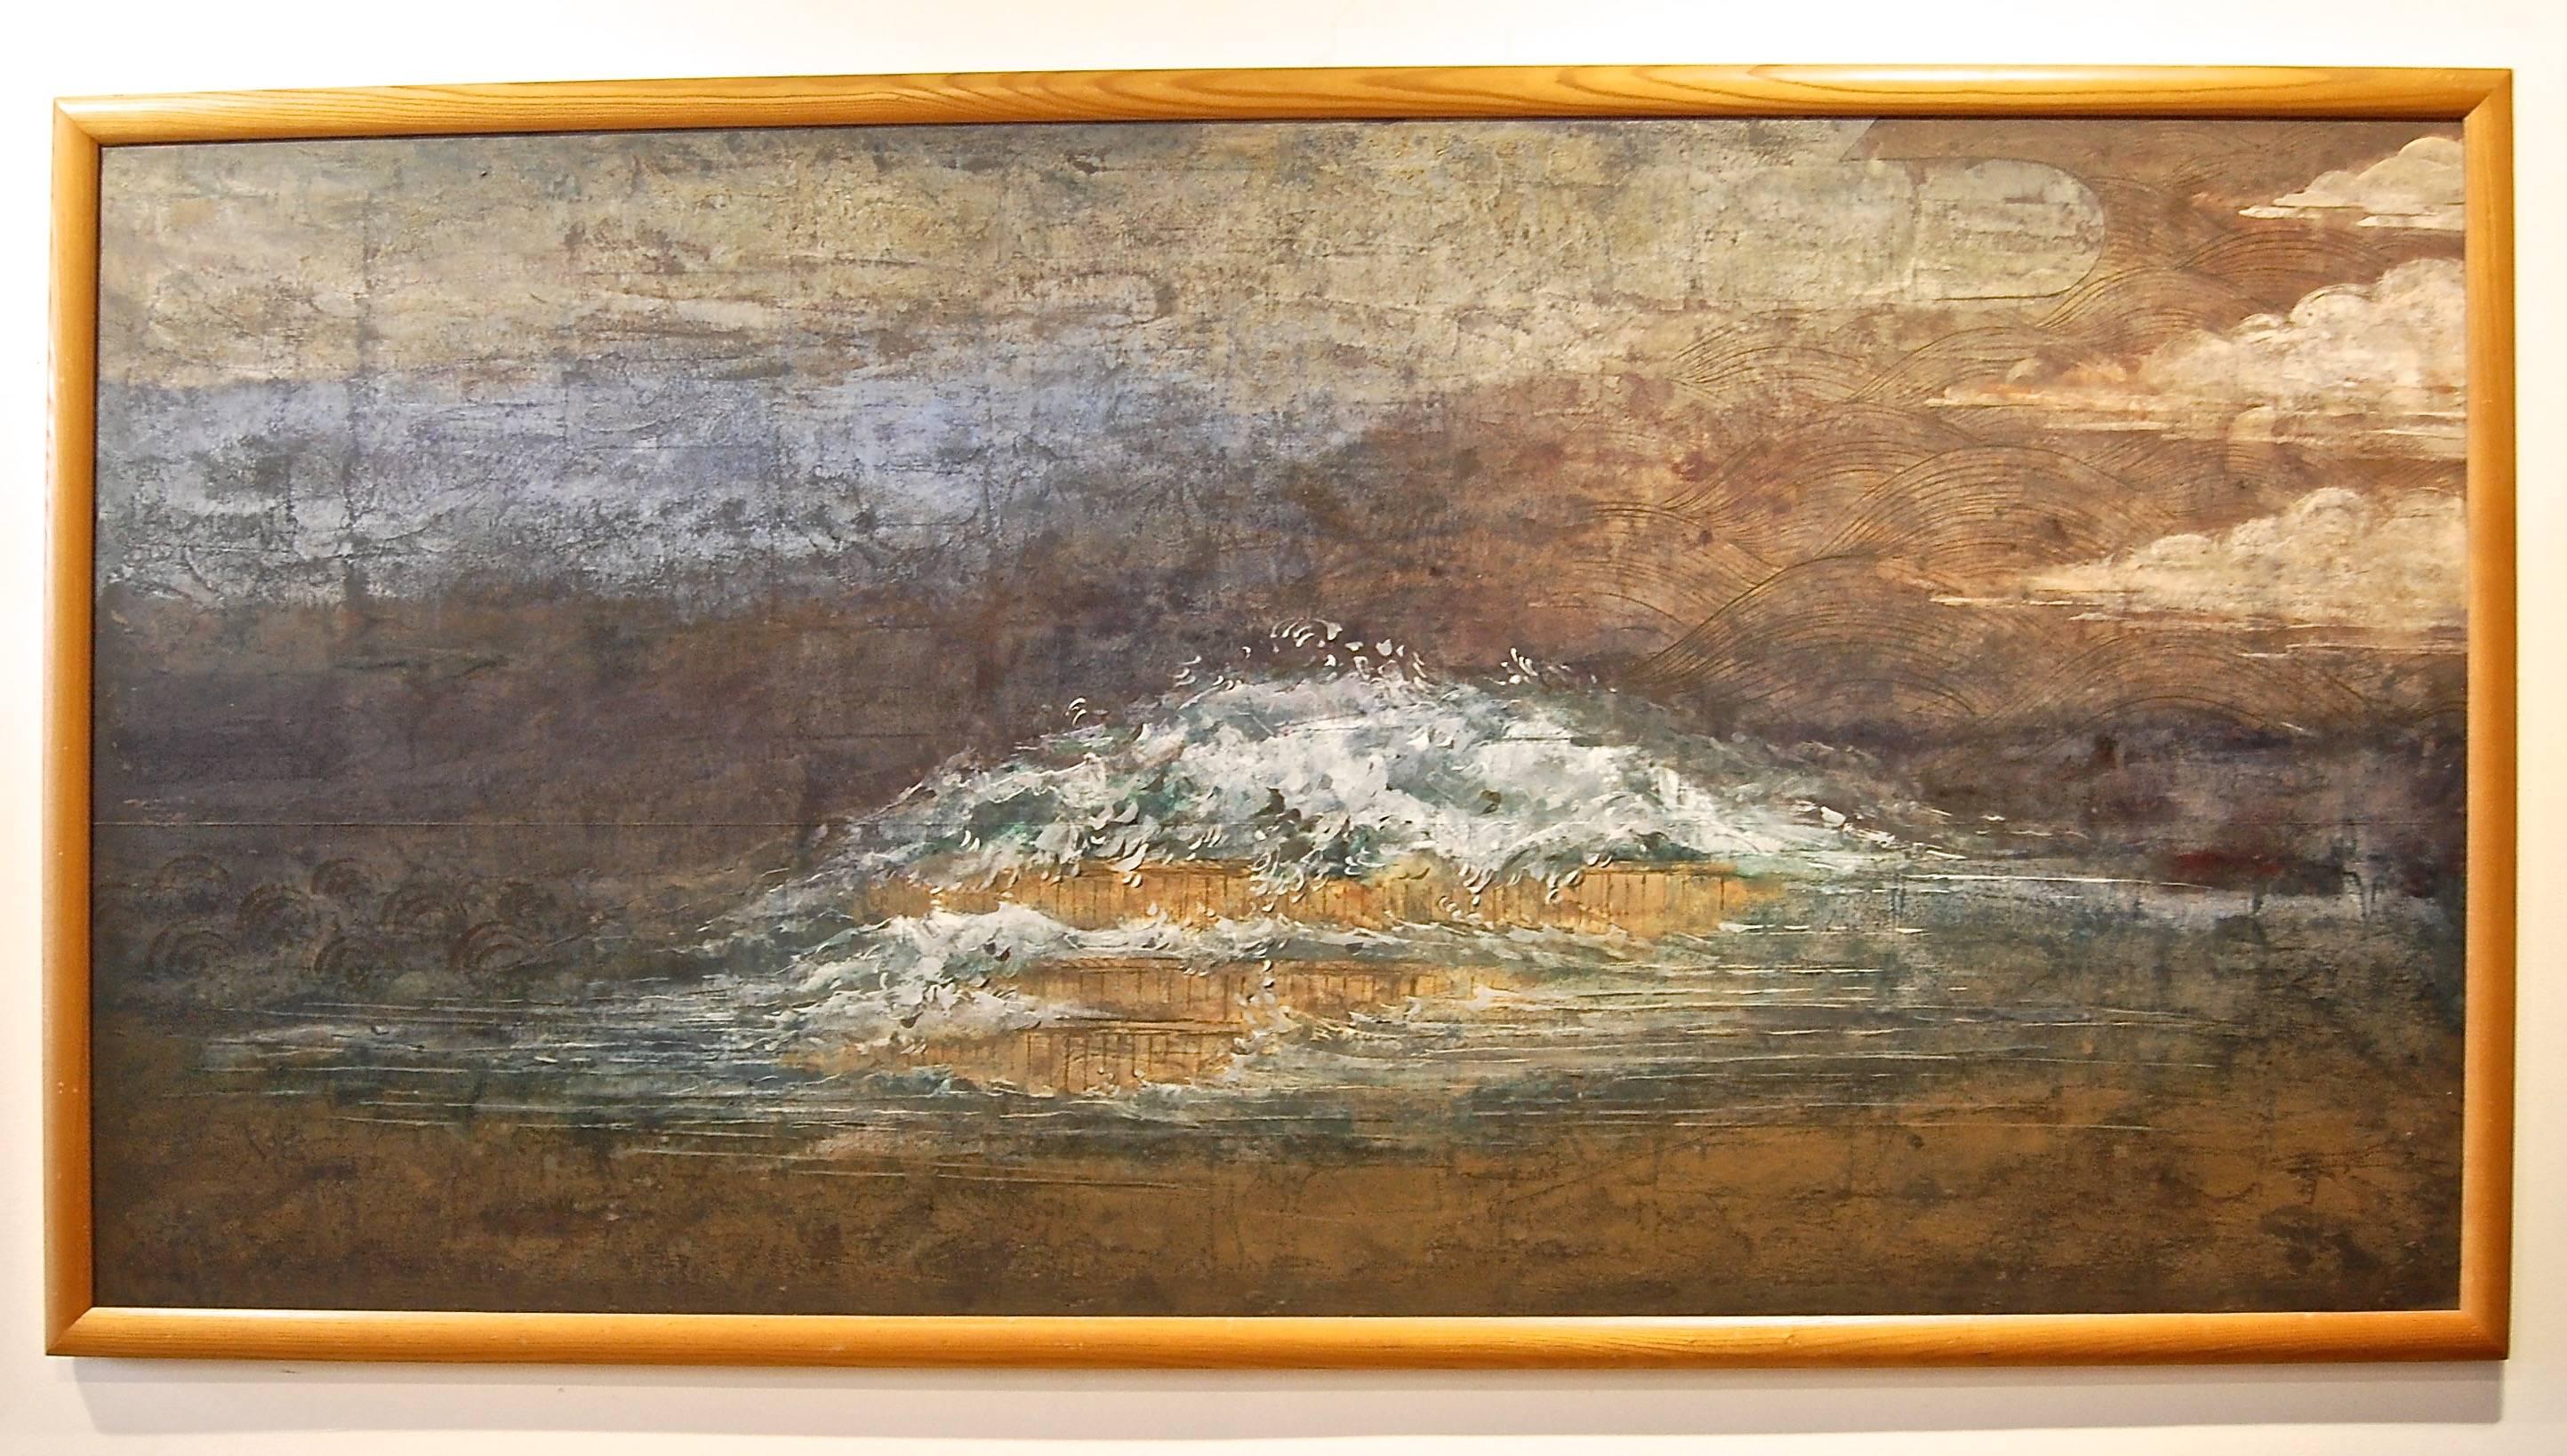 Lim Ha Shan Landscape Painting - Untitled Large Seascape Abstract Mixed Media 